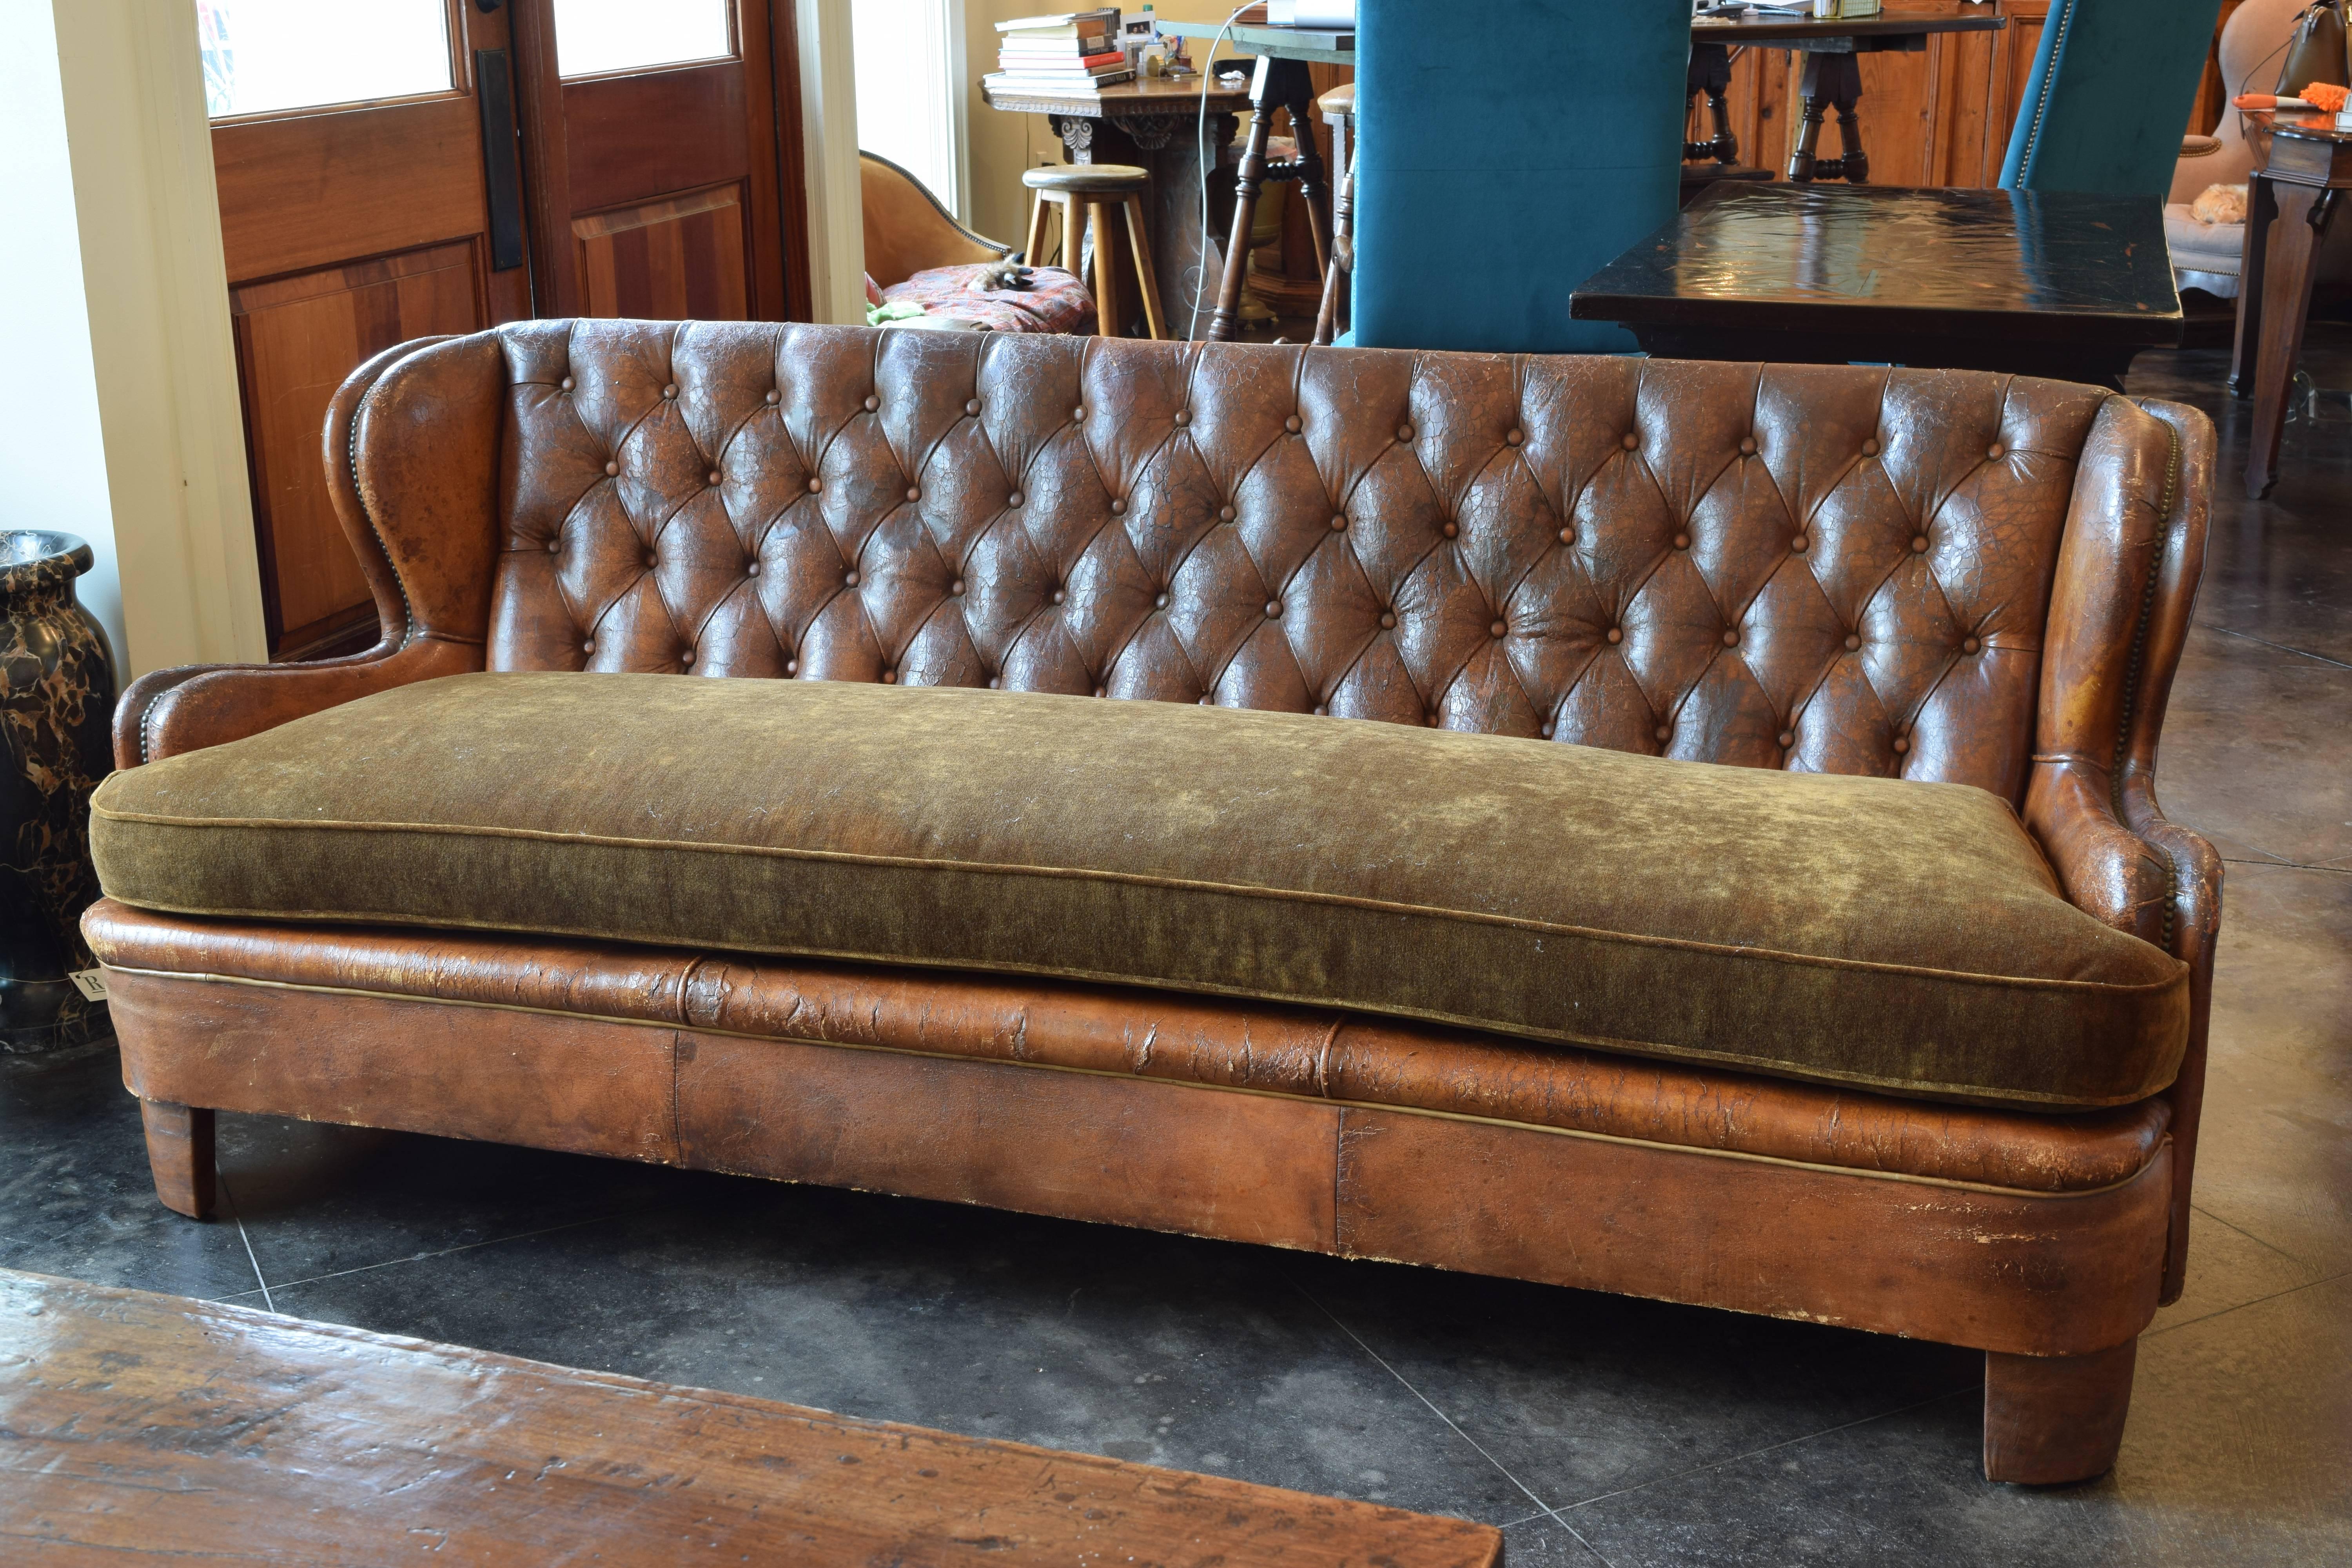 Sofa of slightly convex form with curved arms and a tufted backrest, the arms and back with a brass nailhead lined channel, with a new velvet upholstered down cushion, the feet are covered in leather, second quarter of the 20th century.